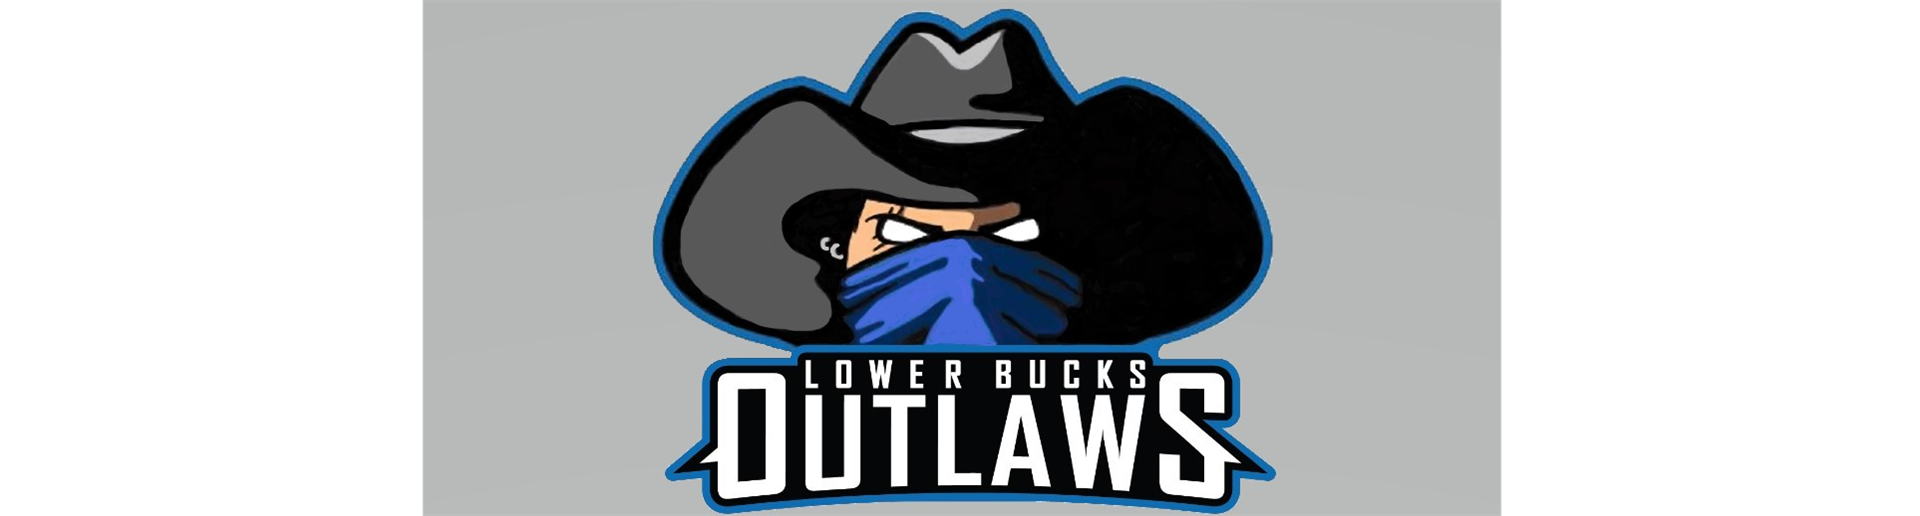 Welcome to the Outlaws!!!!